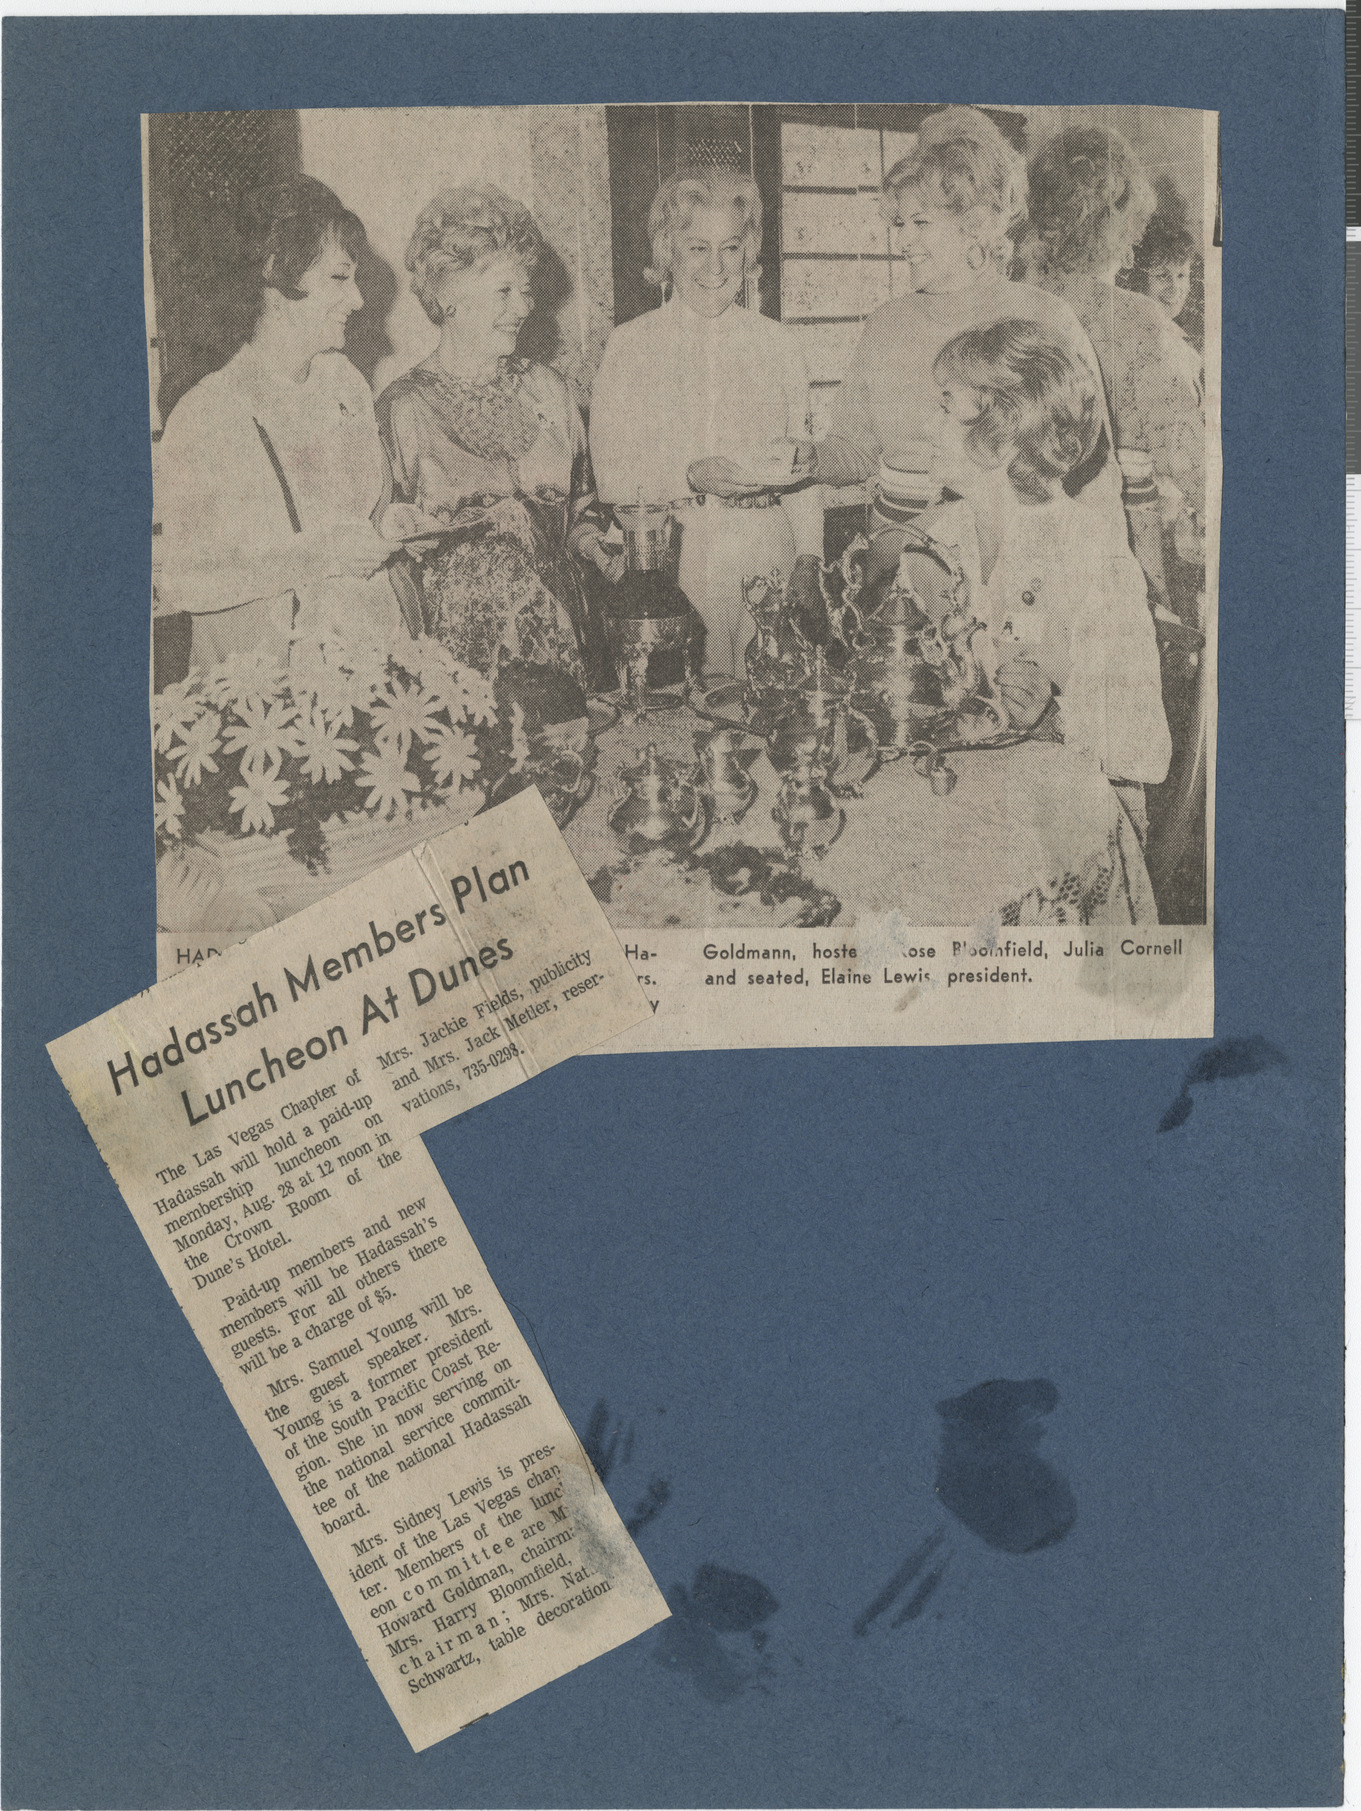 Newspaper clippings, Hadassah women, publication and date unknown, and Hadassah members Plan Luncheon at Dunes, publication and date unknown